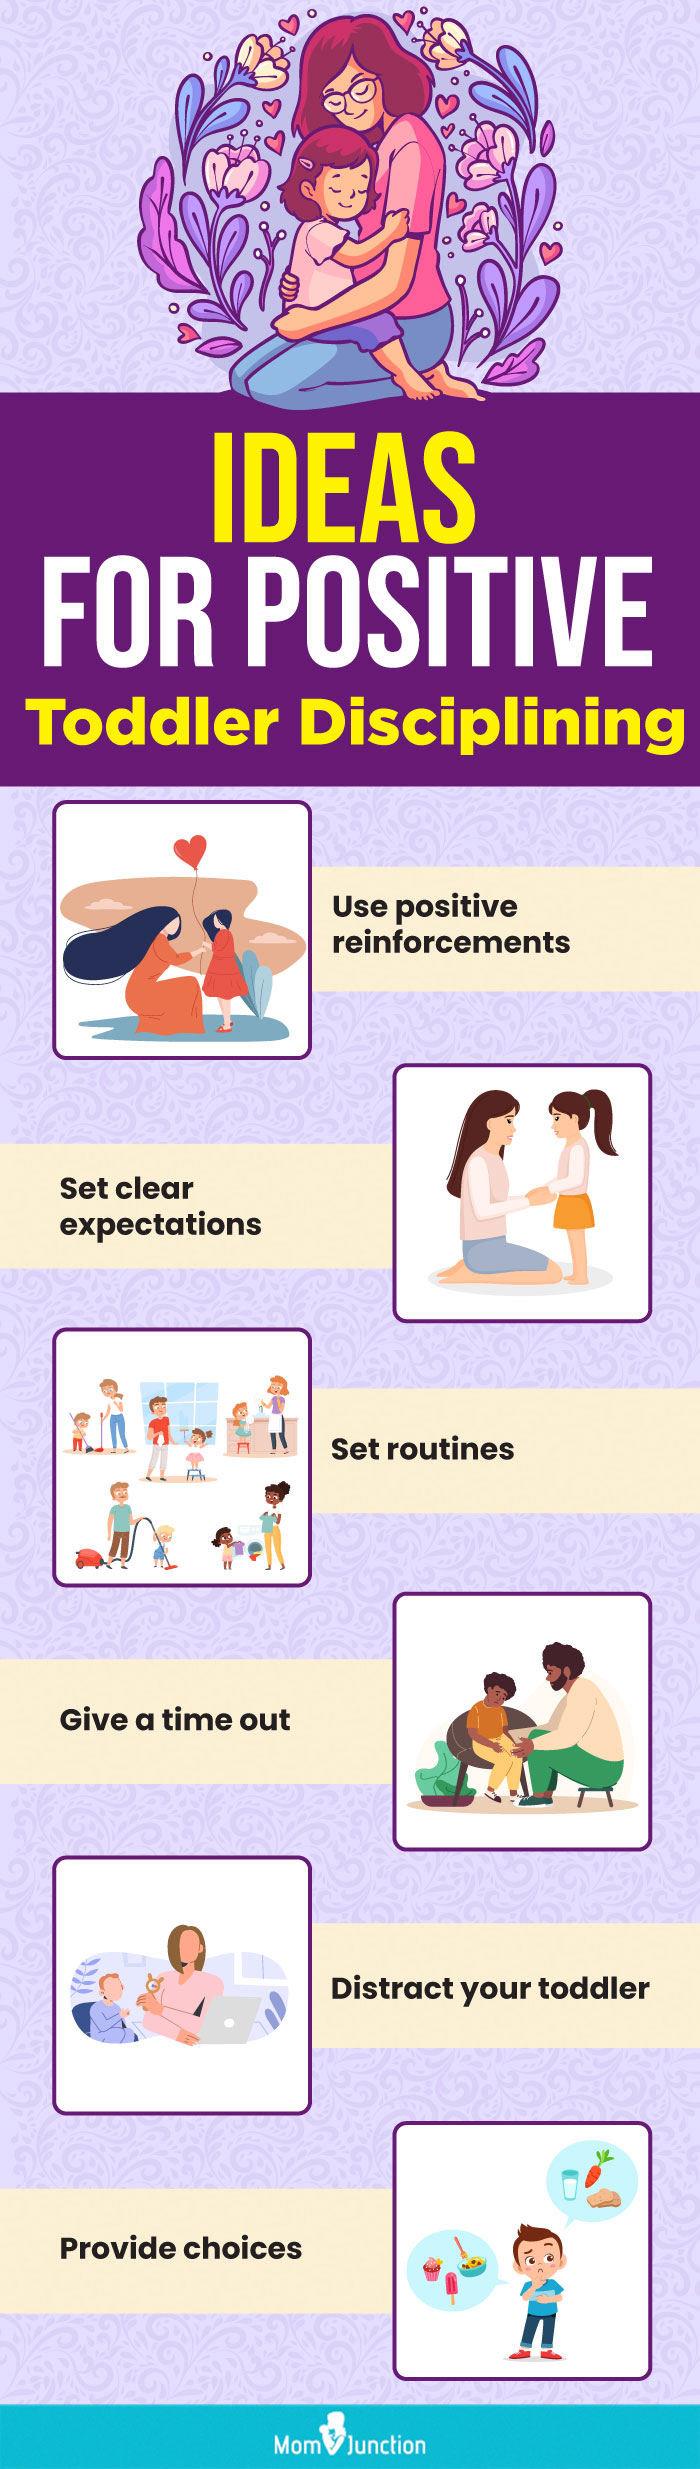 ideas for positive toddler disciplining (infographic)